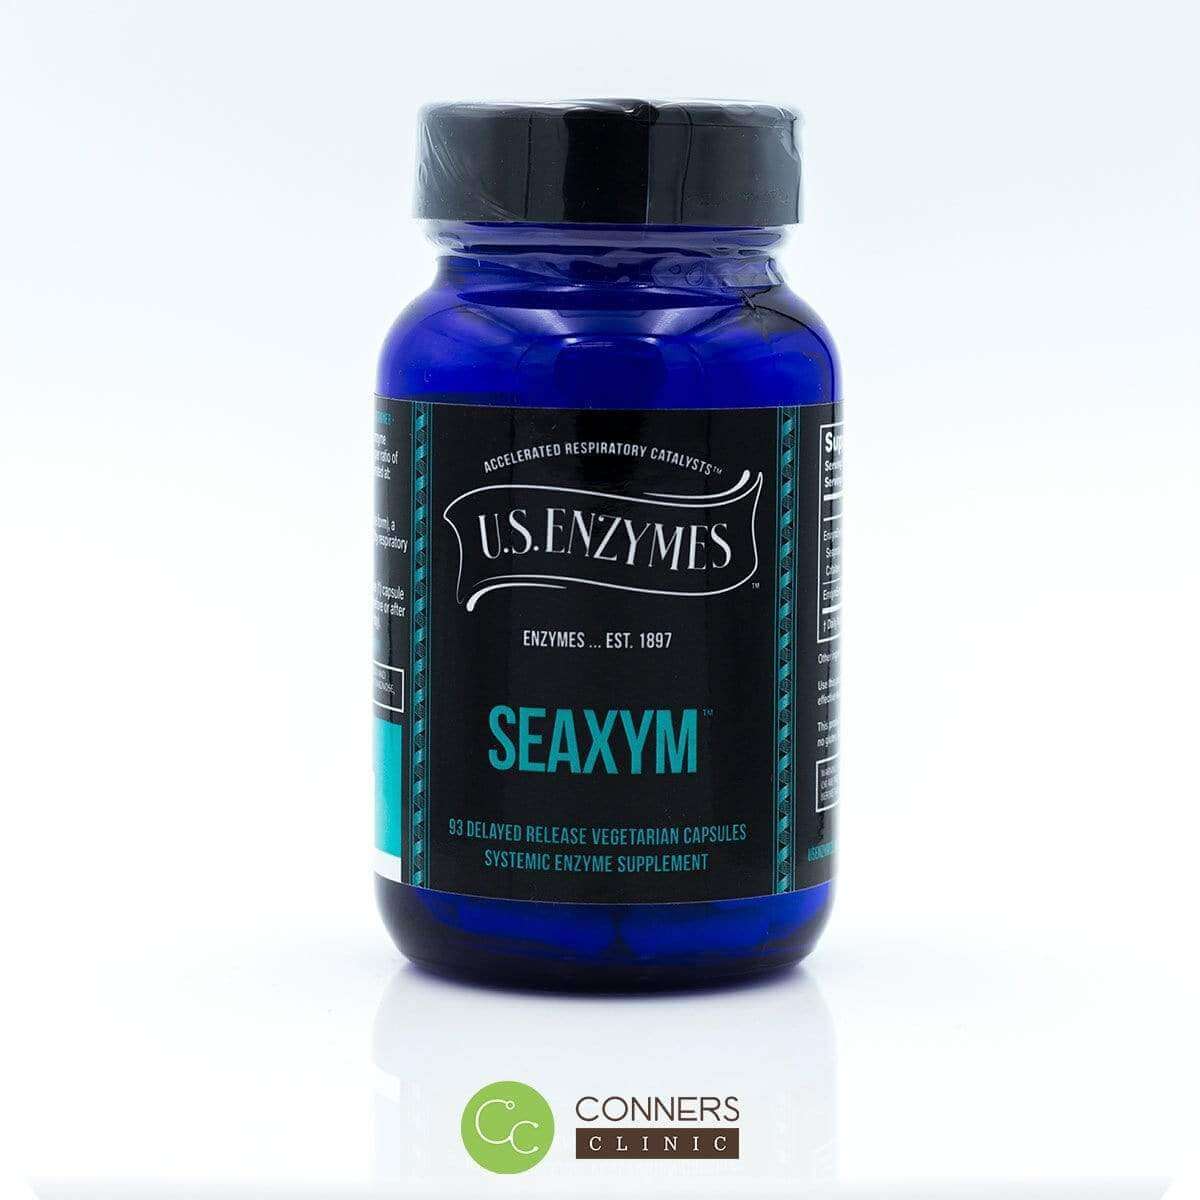 Seaxym Enzymes - 93 caps U.S. Enzymes Supplement - Conners Clinic